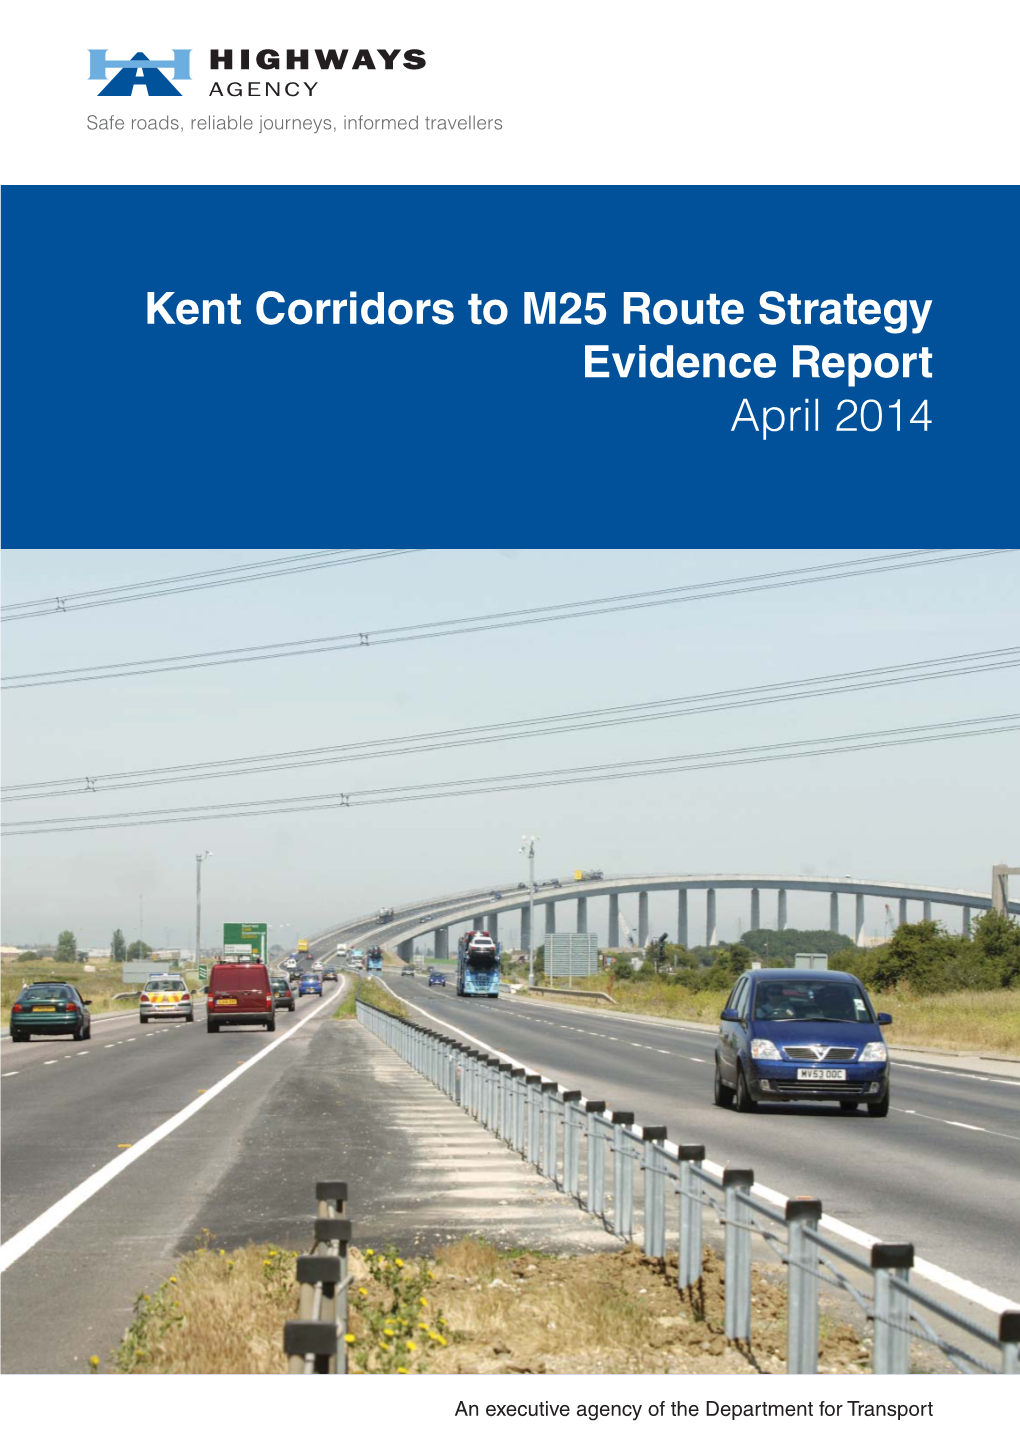 Kent Corridors to M25 Route Strategy Evidence Report April 2014